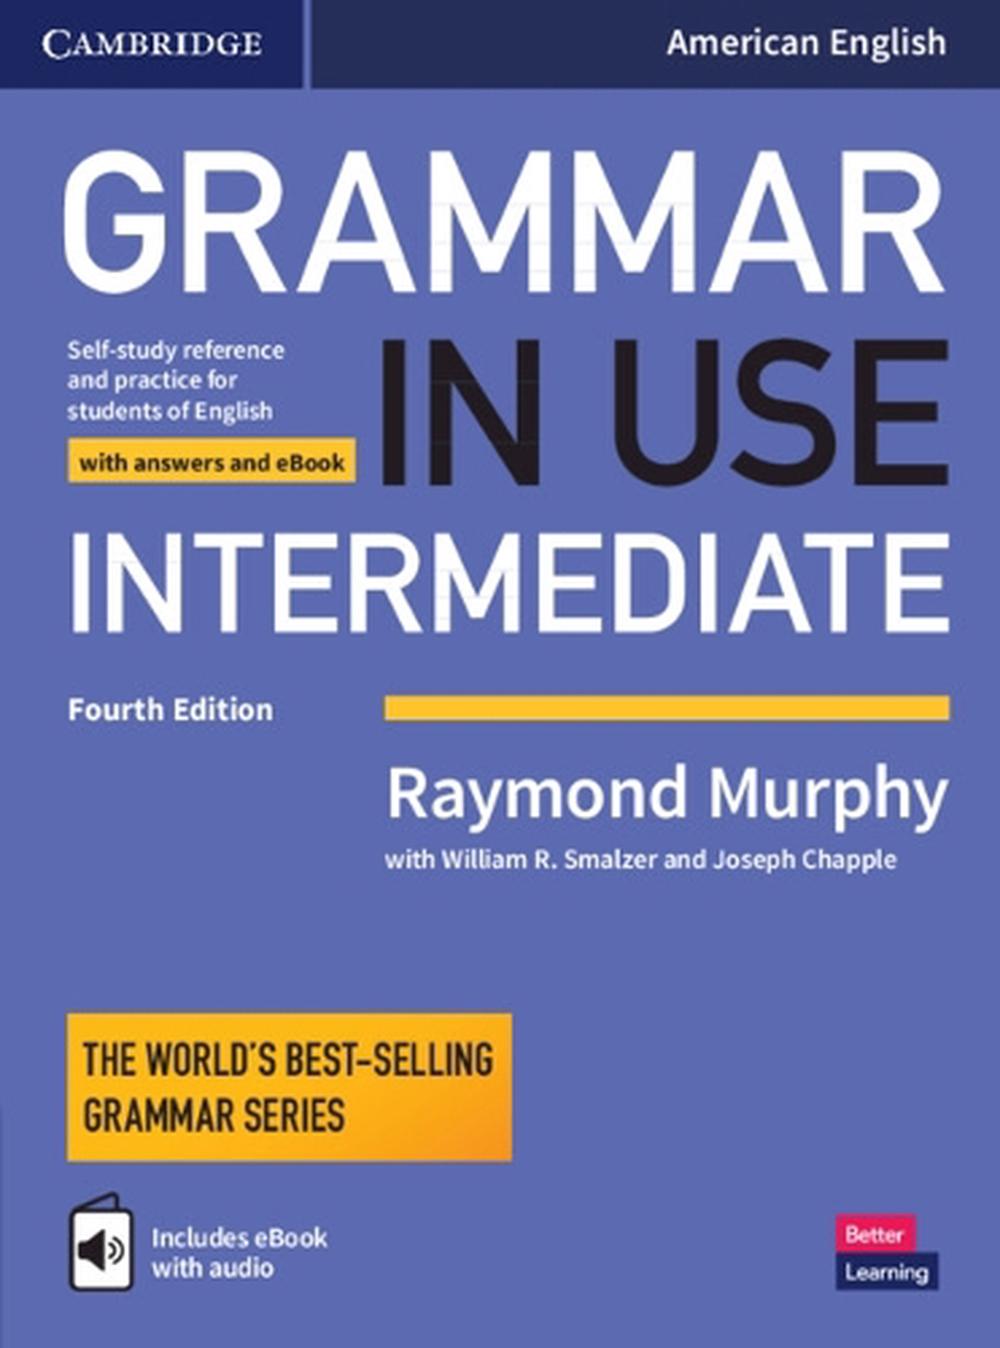 eBook　in　Book　Use　Answers　The　Grammar　Interactive　Merchandise,　Raymond　by　Nile　Murphy,　Book　Intermediate　with　online　at　Student's　9781108617611　and　Buy